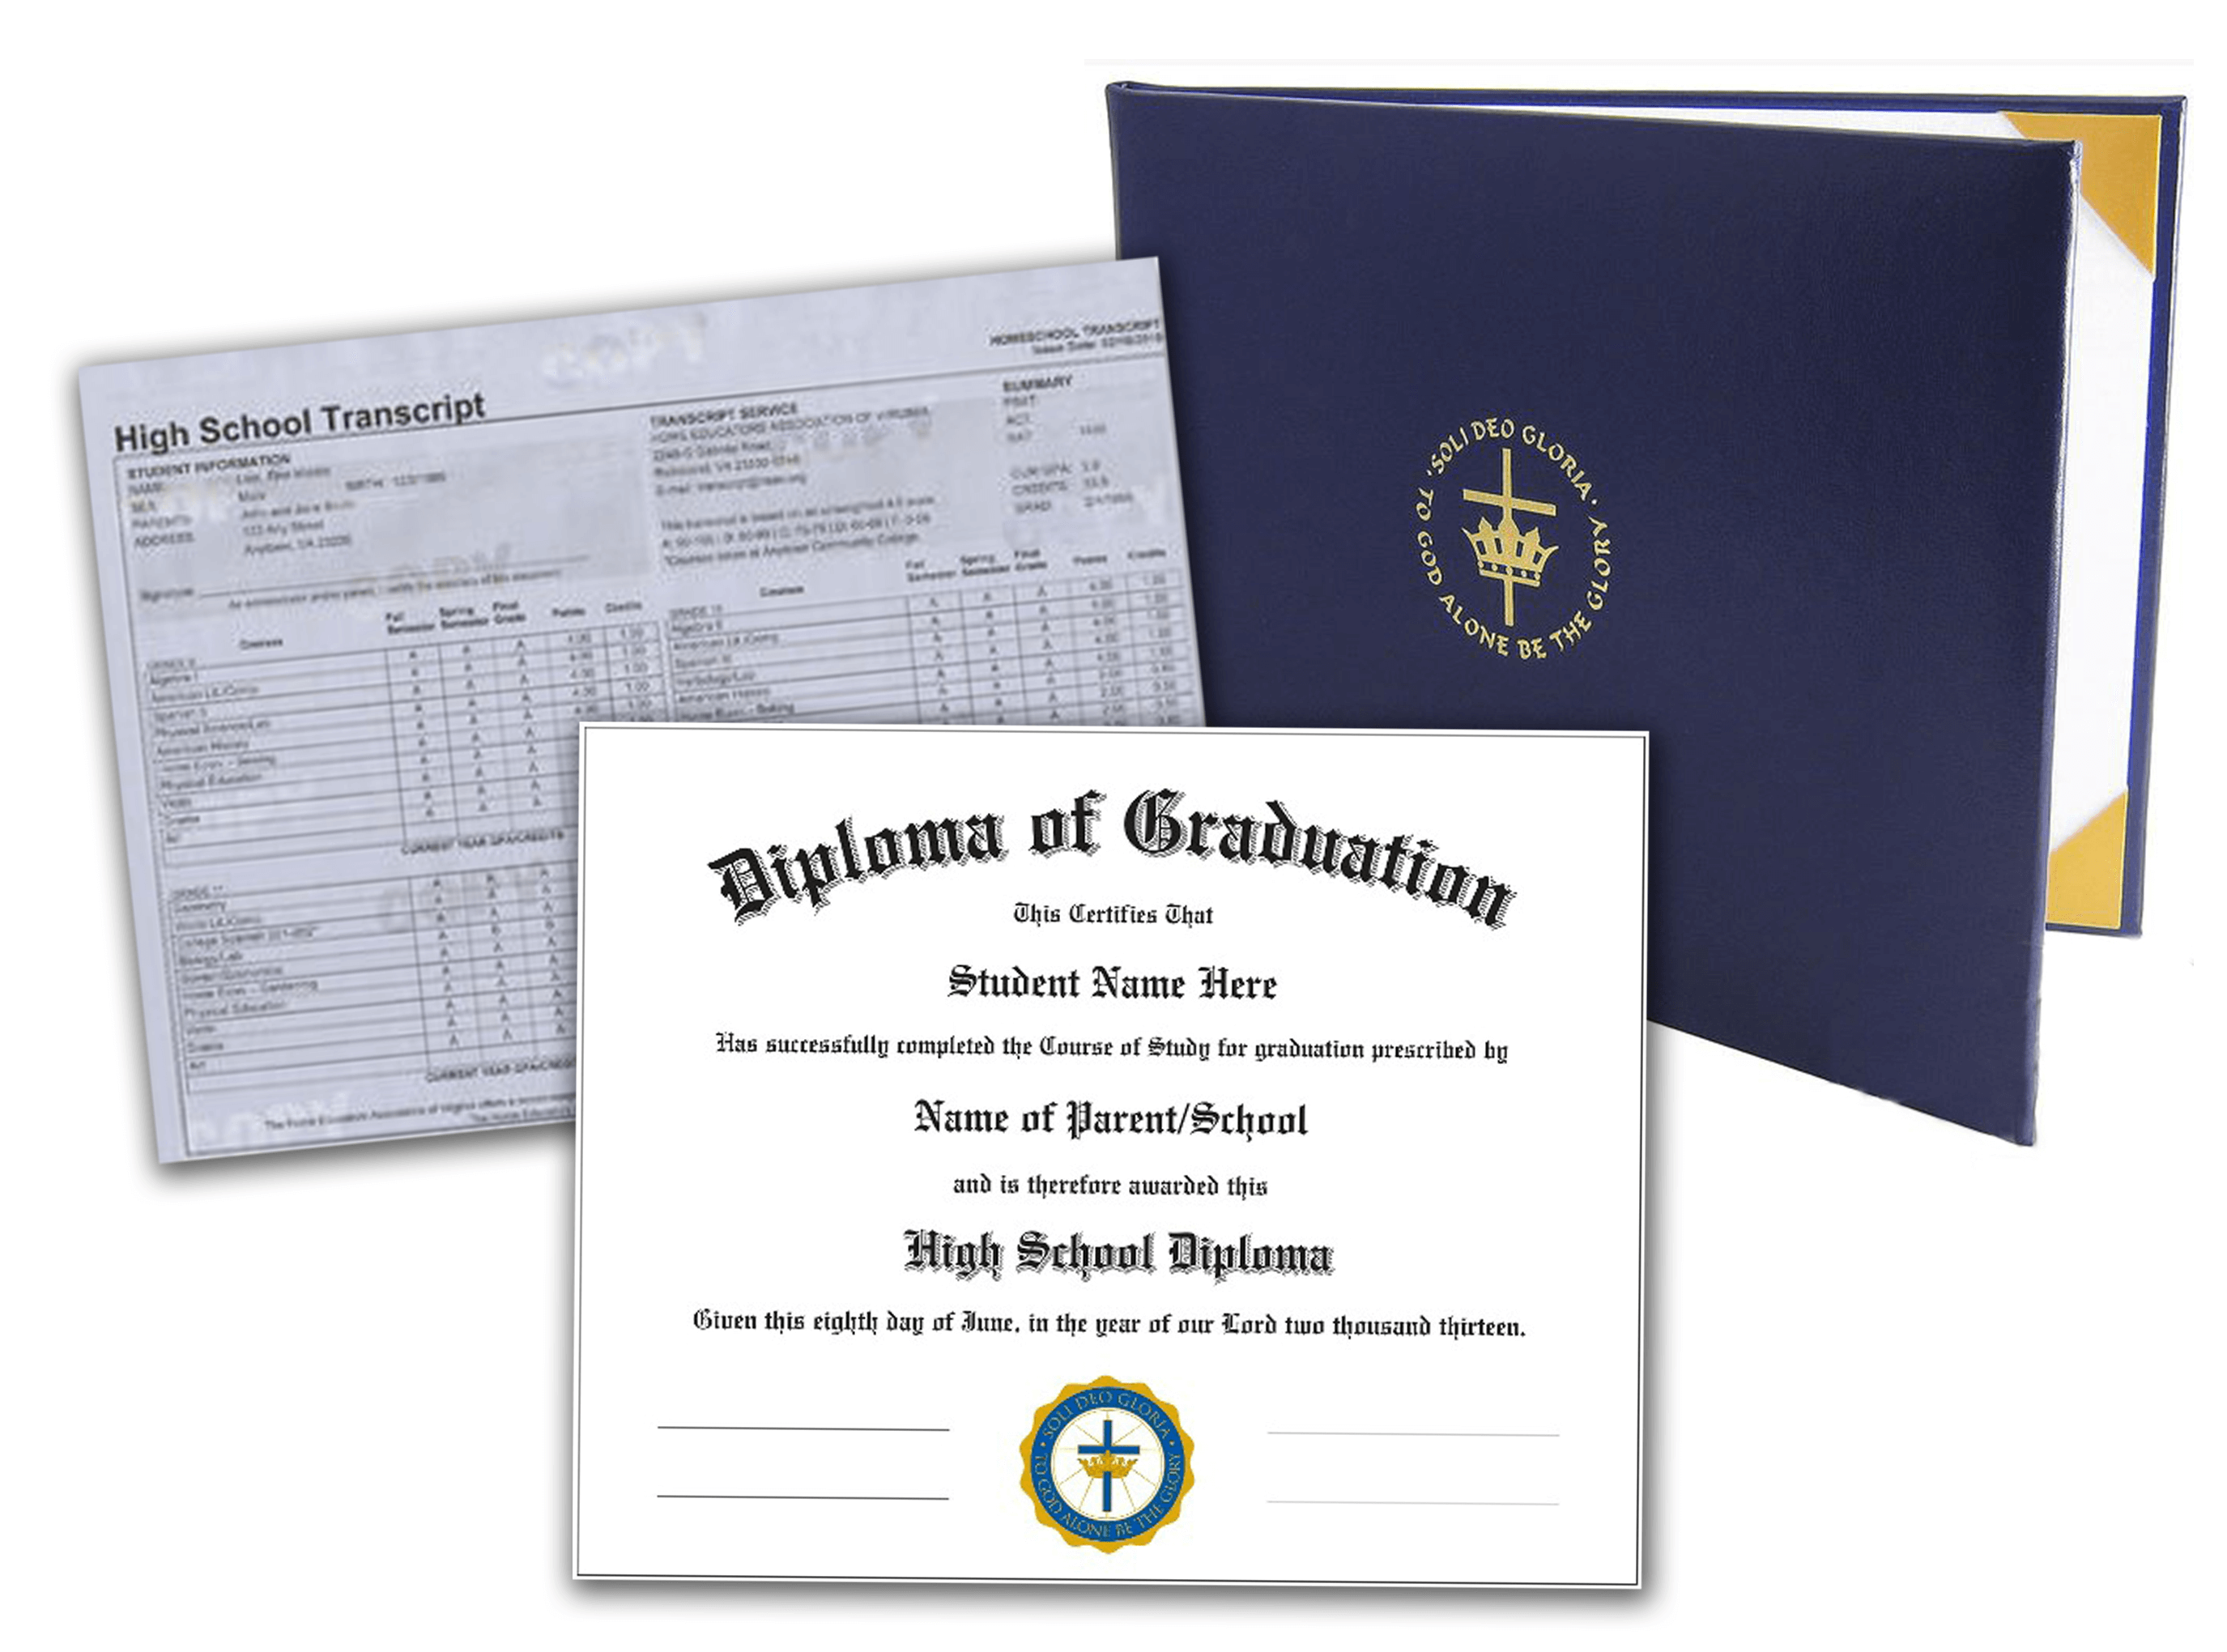 Diploma-Transcript-and-Cover